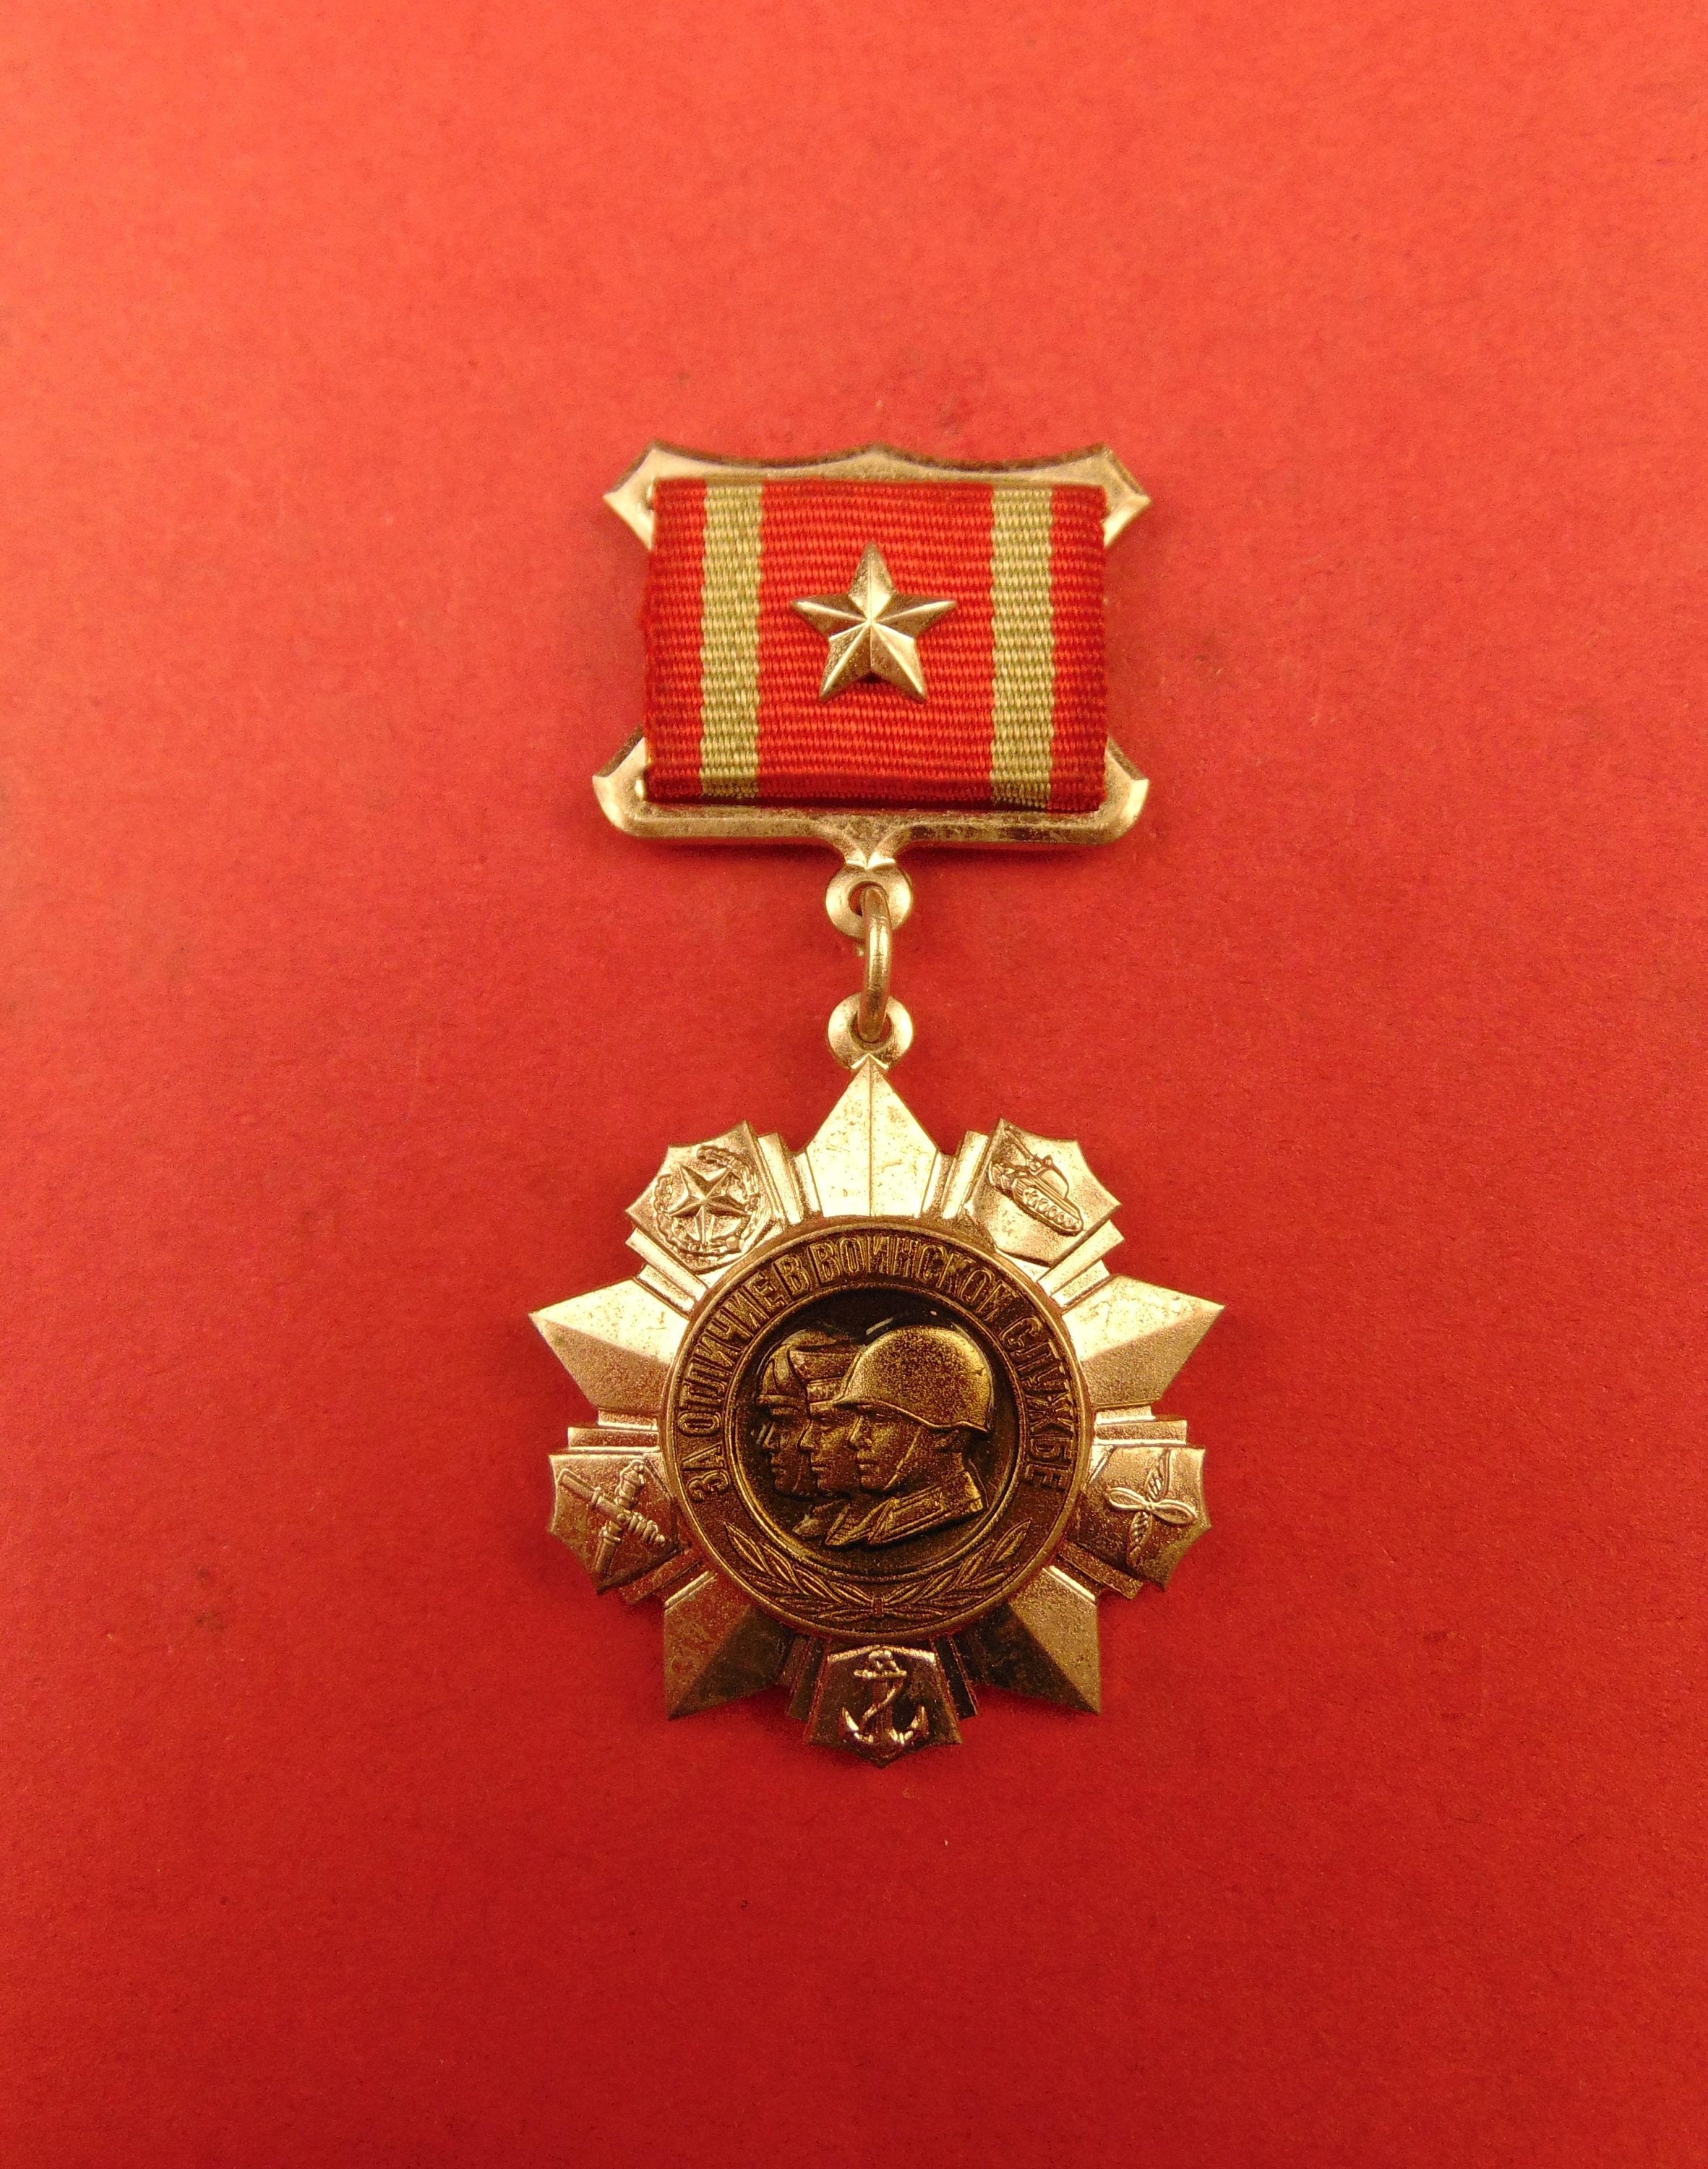 Postsoviet russian military award medal badge For service in tank forces of Russia with document